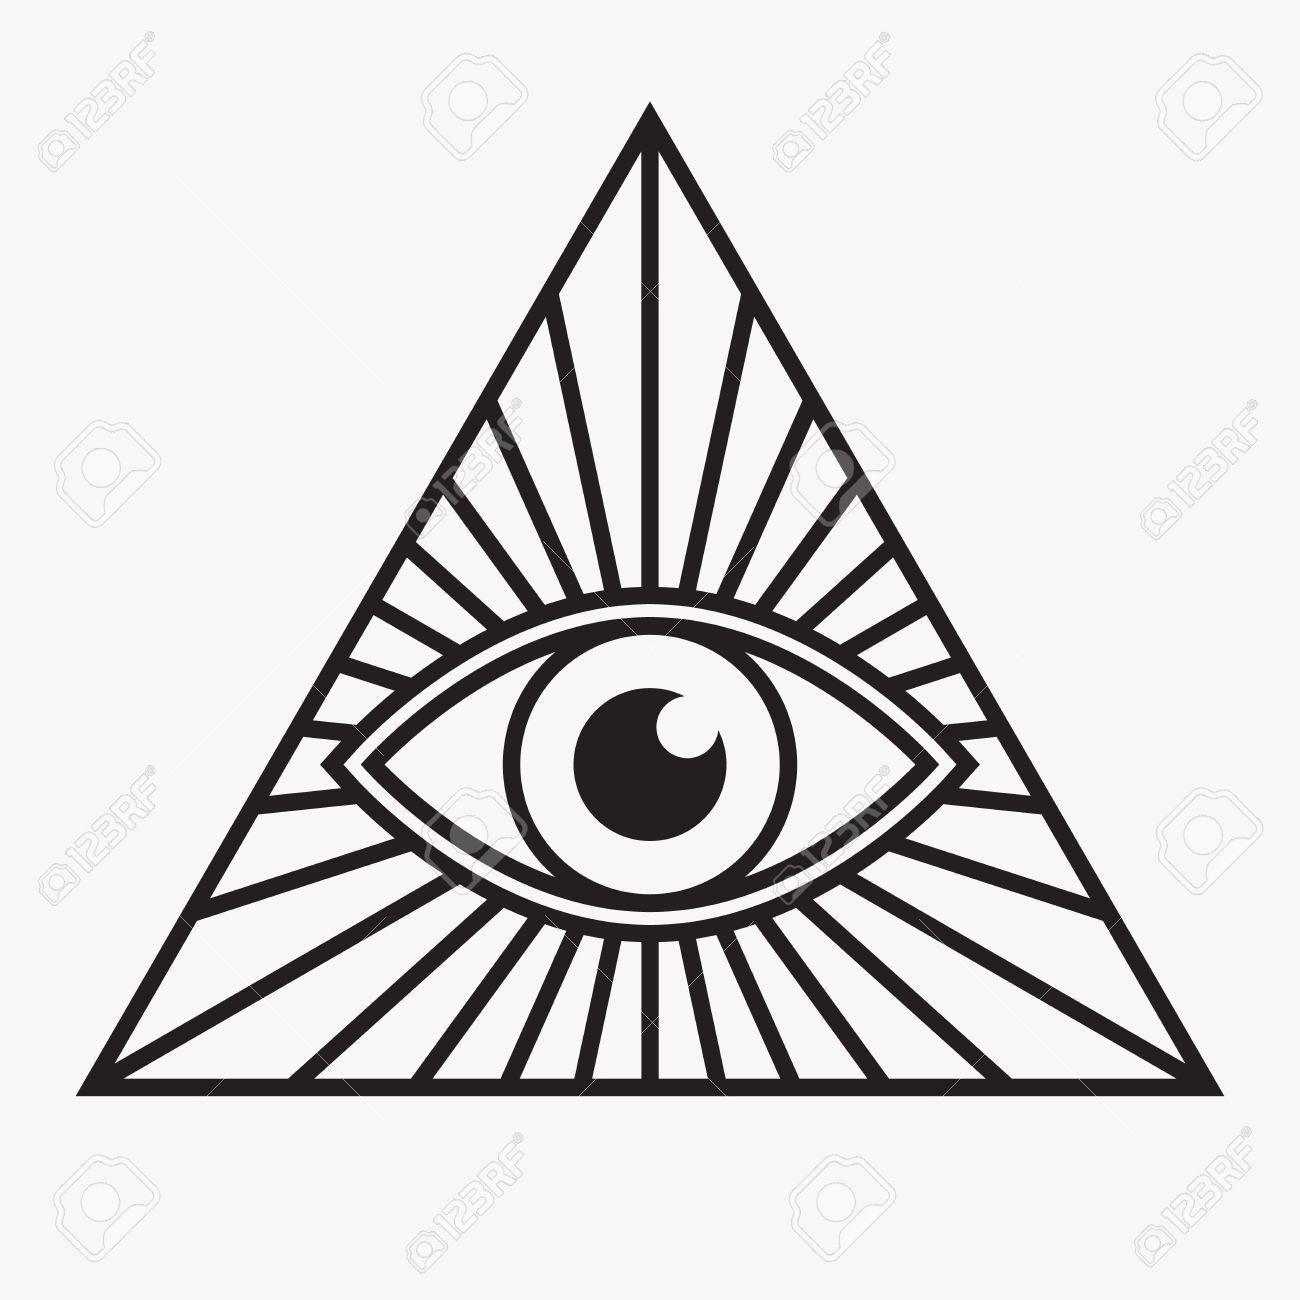 Black and White Triangle with Eye Logo - All seeing eye symbol, vector illustration | Patterns for WCIP ...